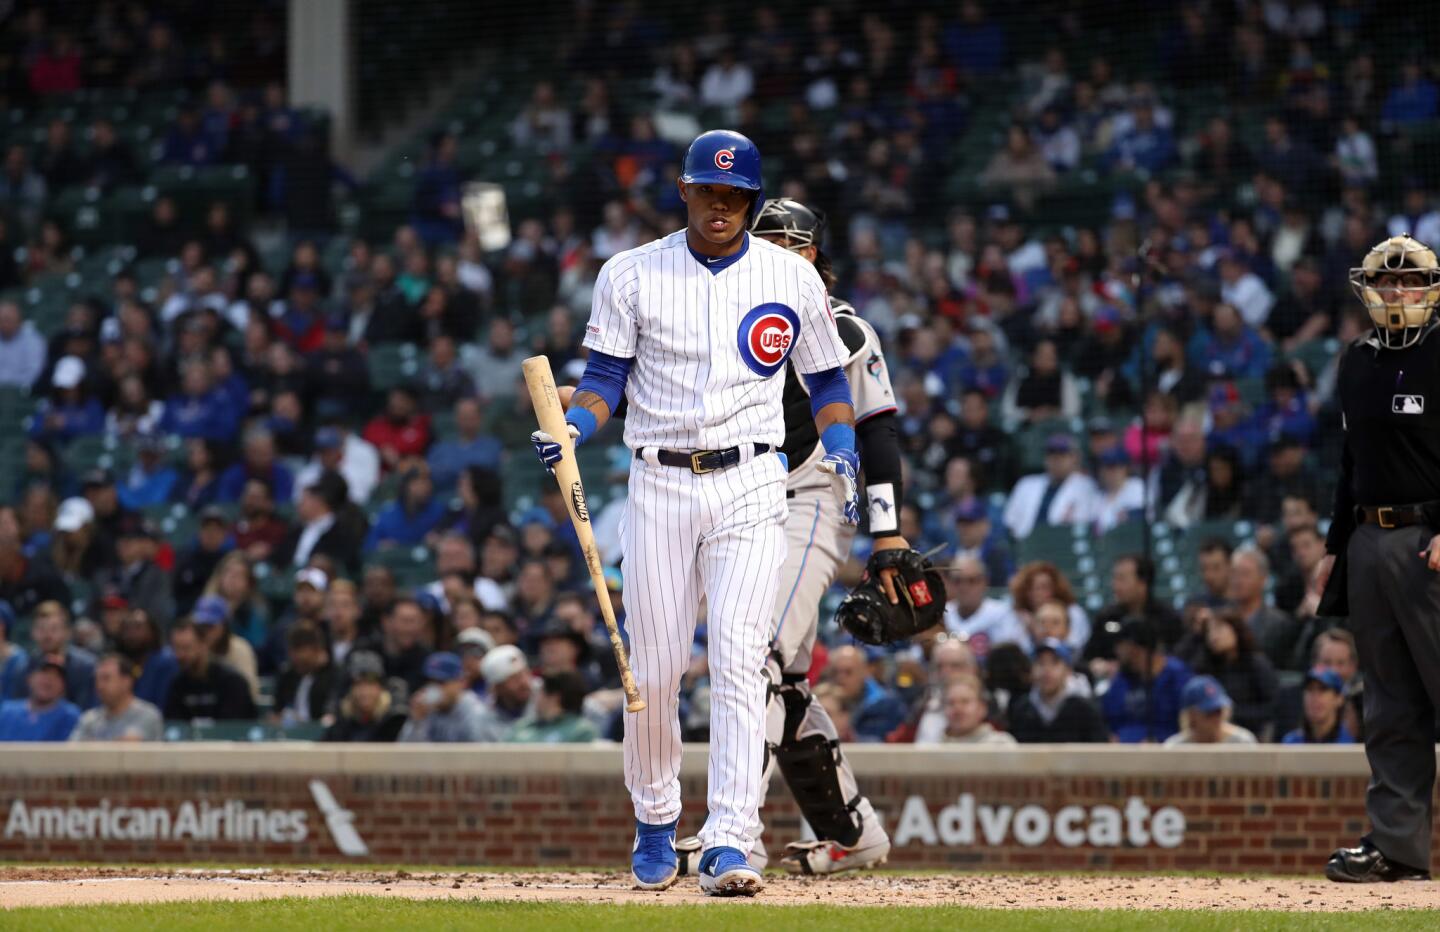 Addison Russell strikes out in the third inning against the Marlins on May 8, 2019, at Wrigley Field.